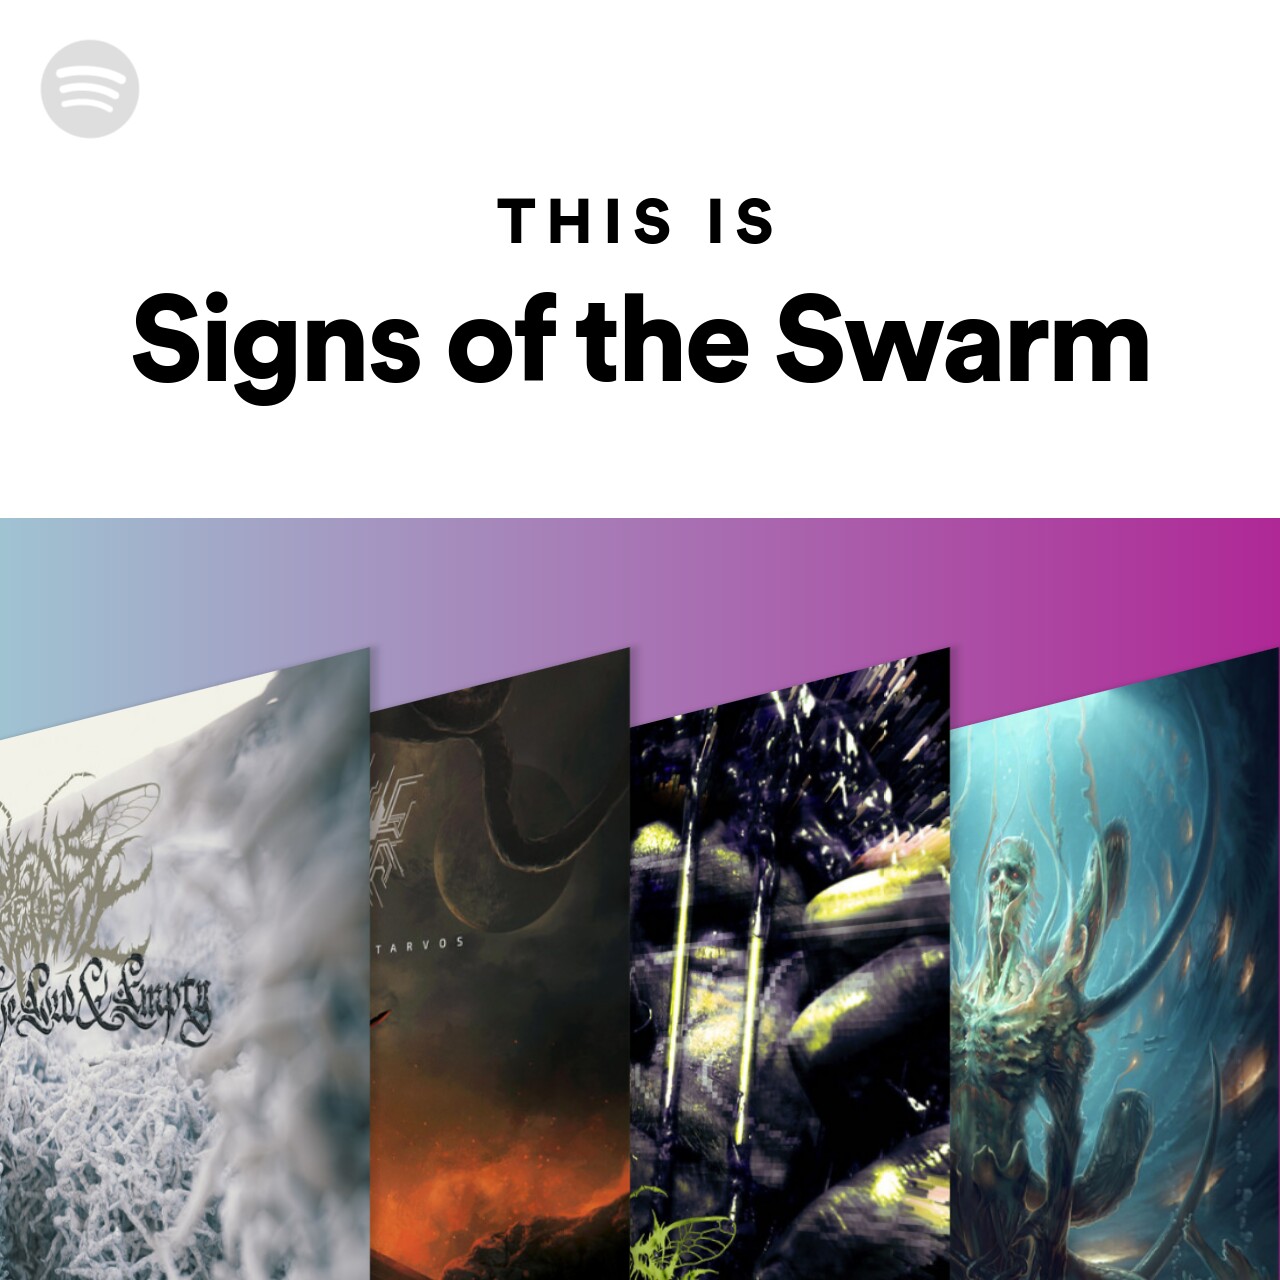 This Is Signs of the Swarm